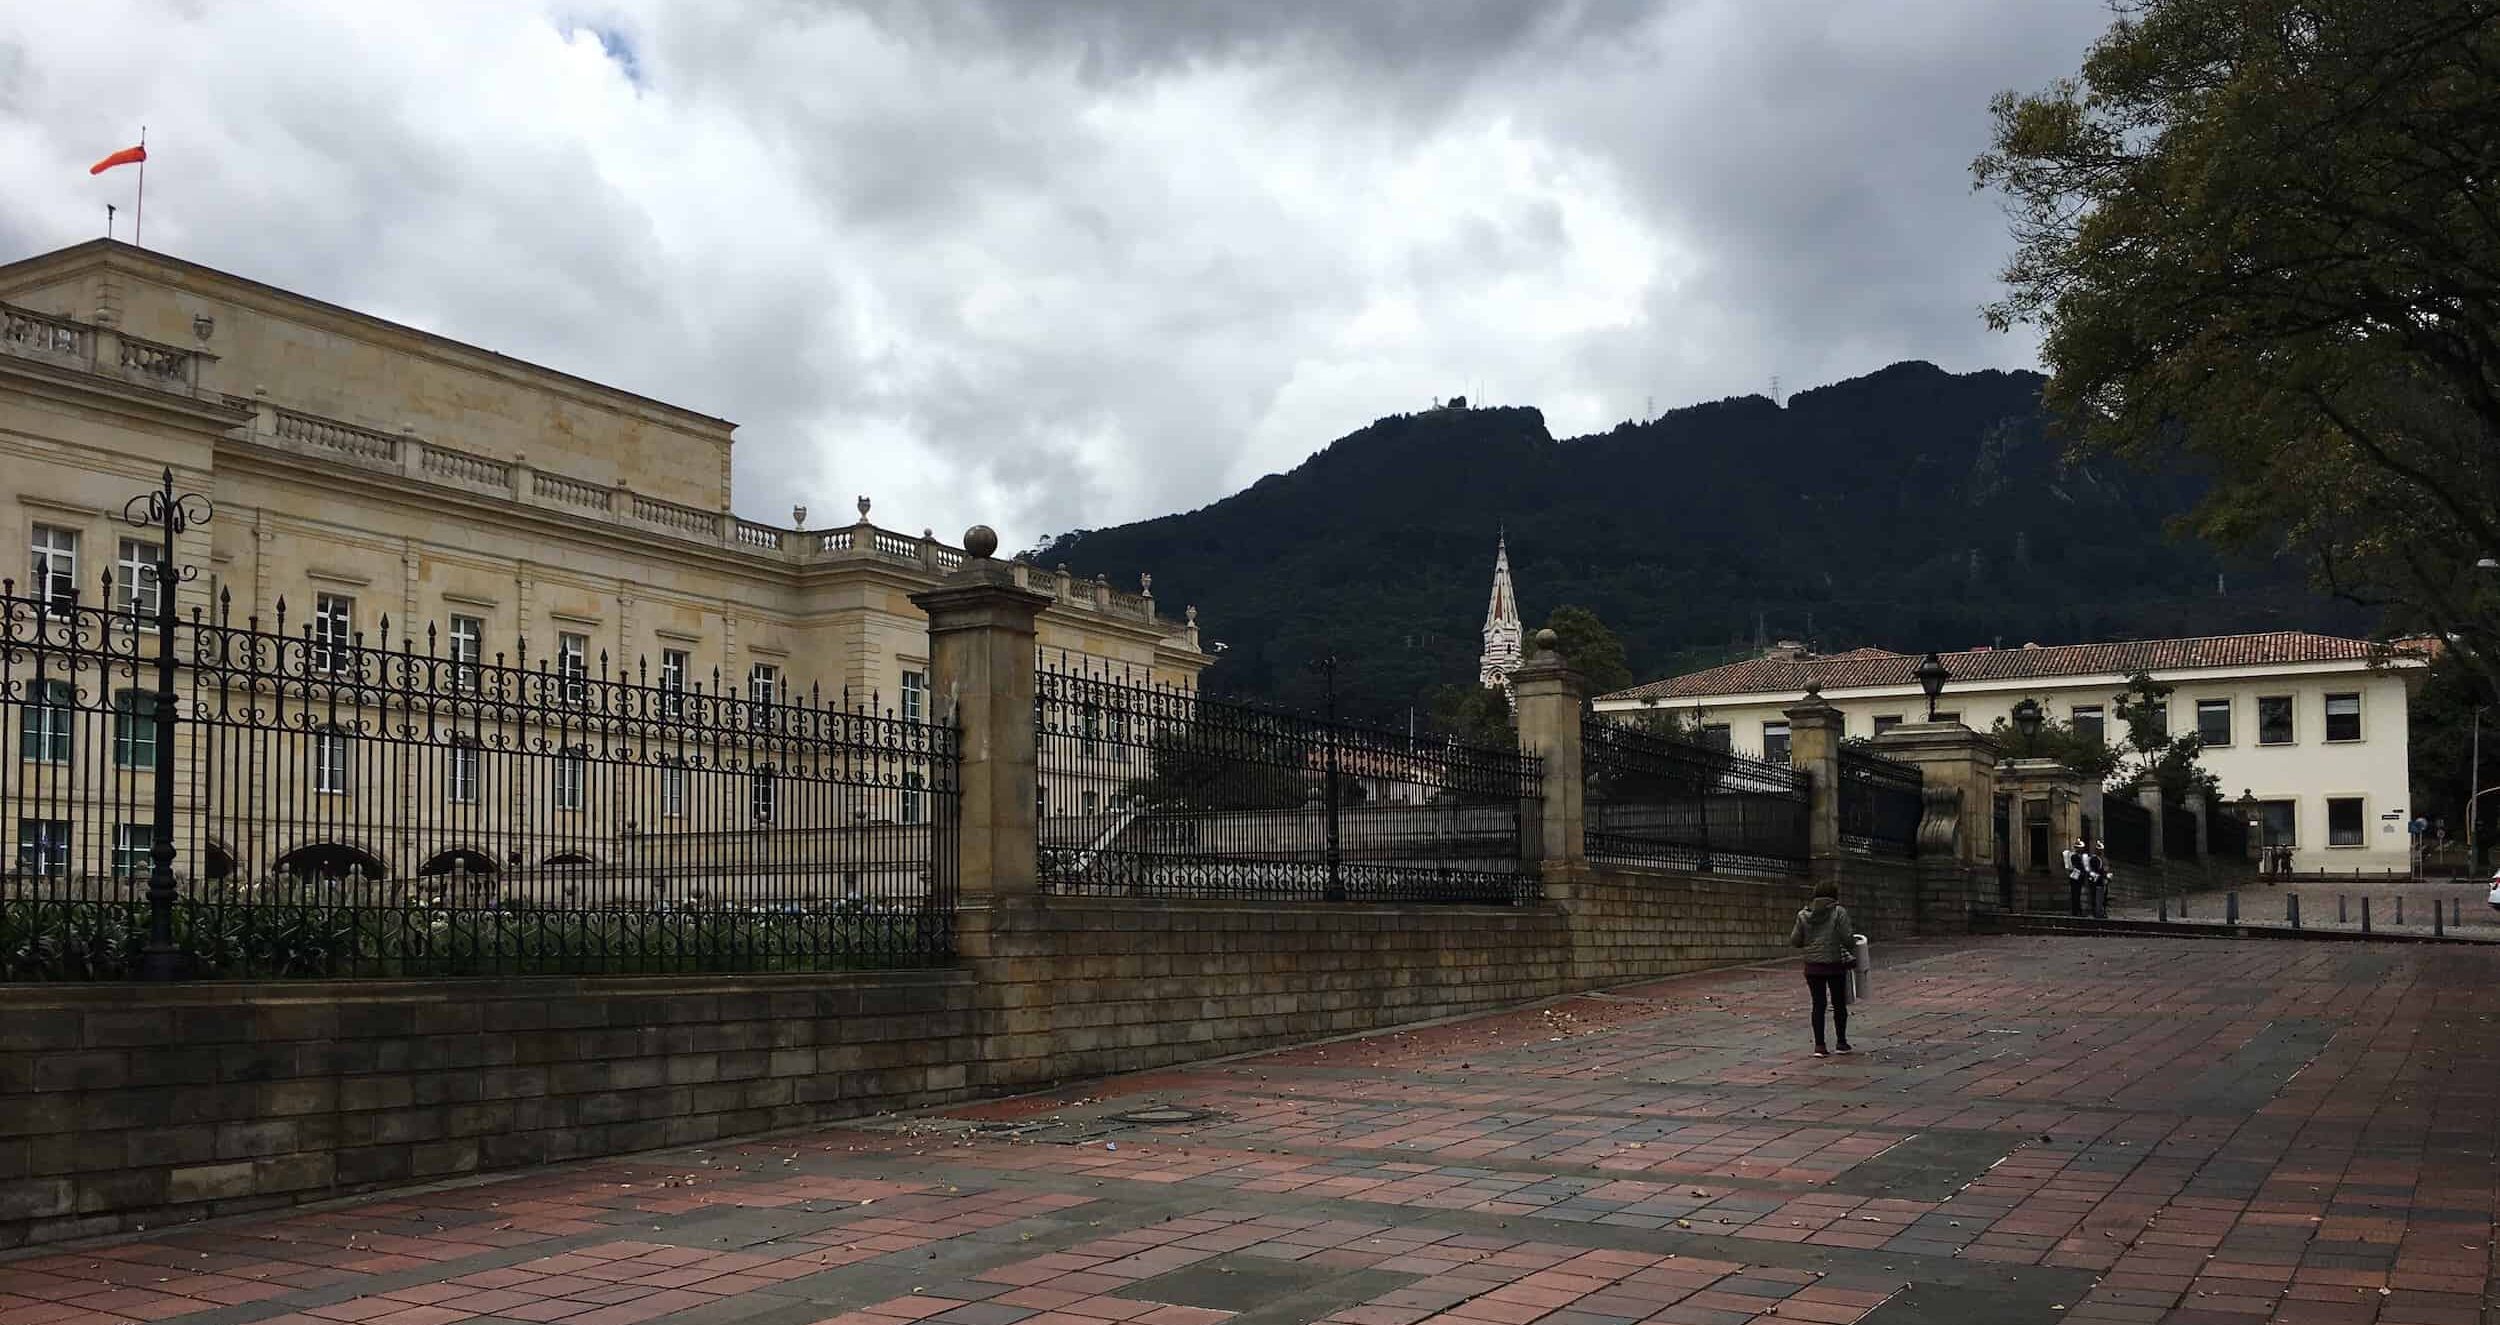 Nariño Palace from Calle 7